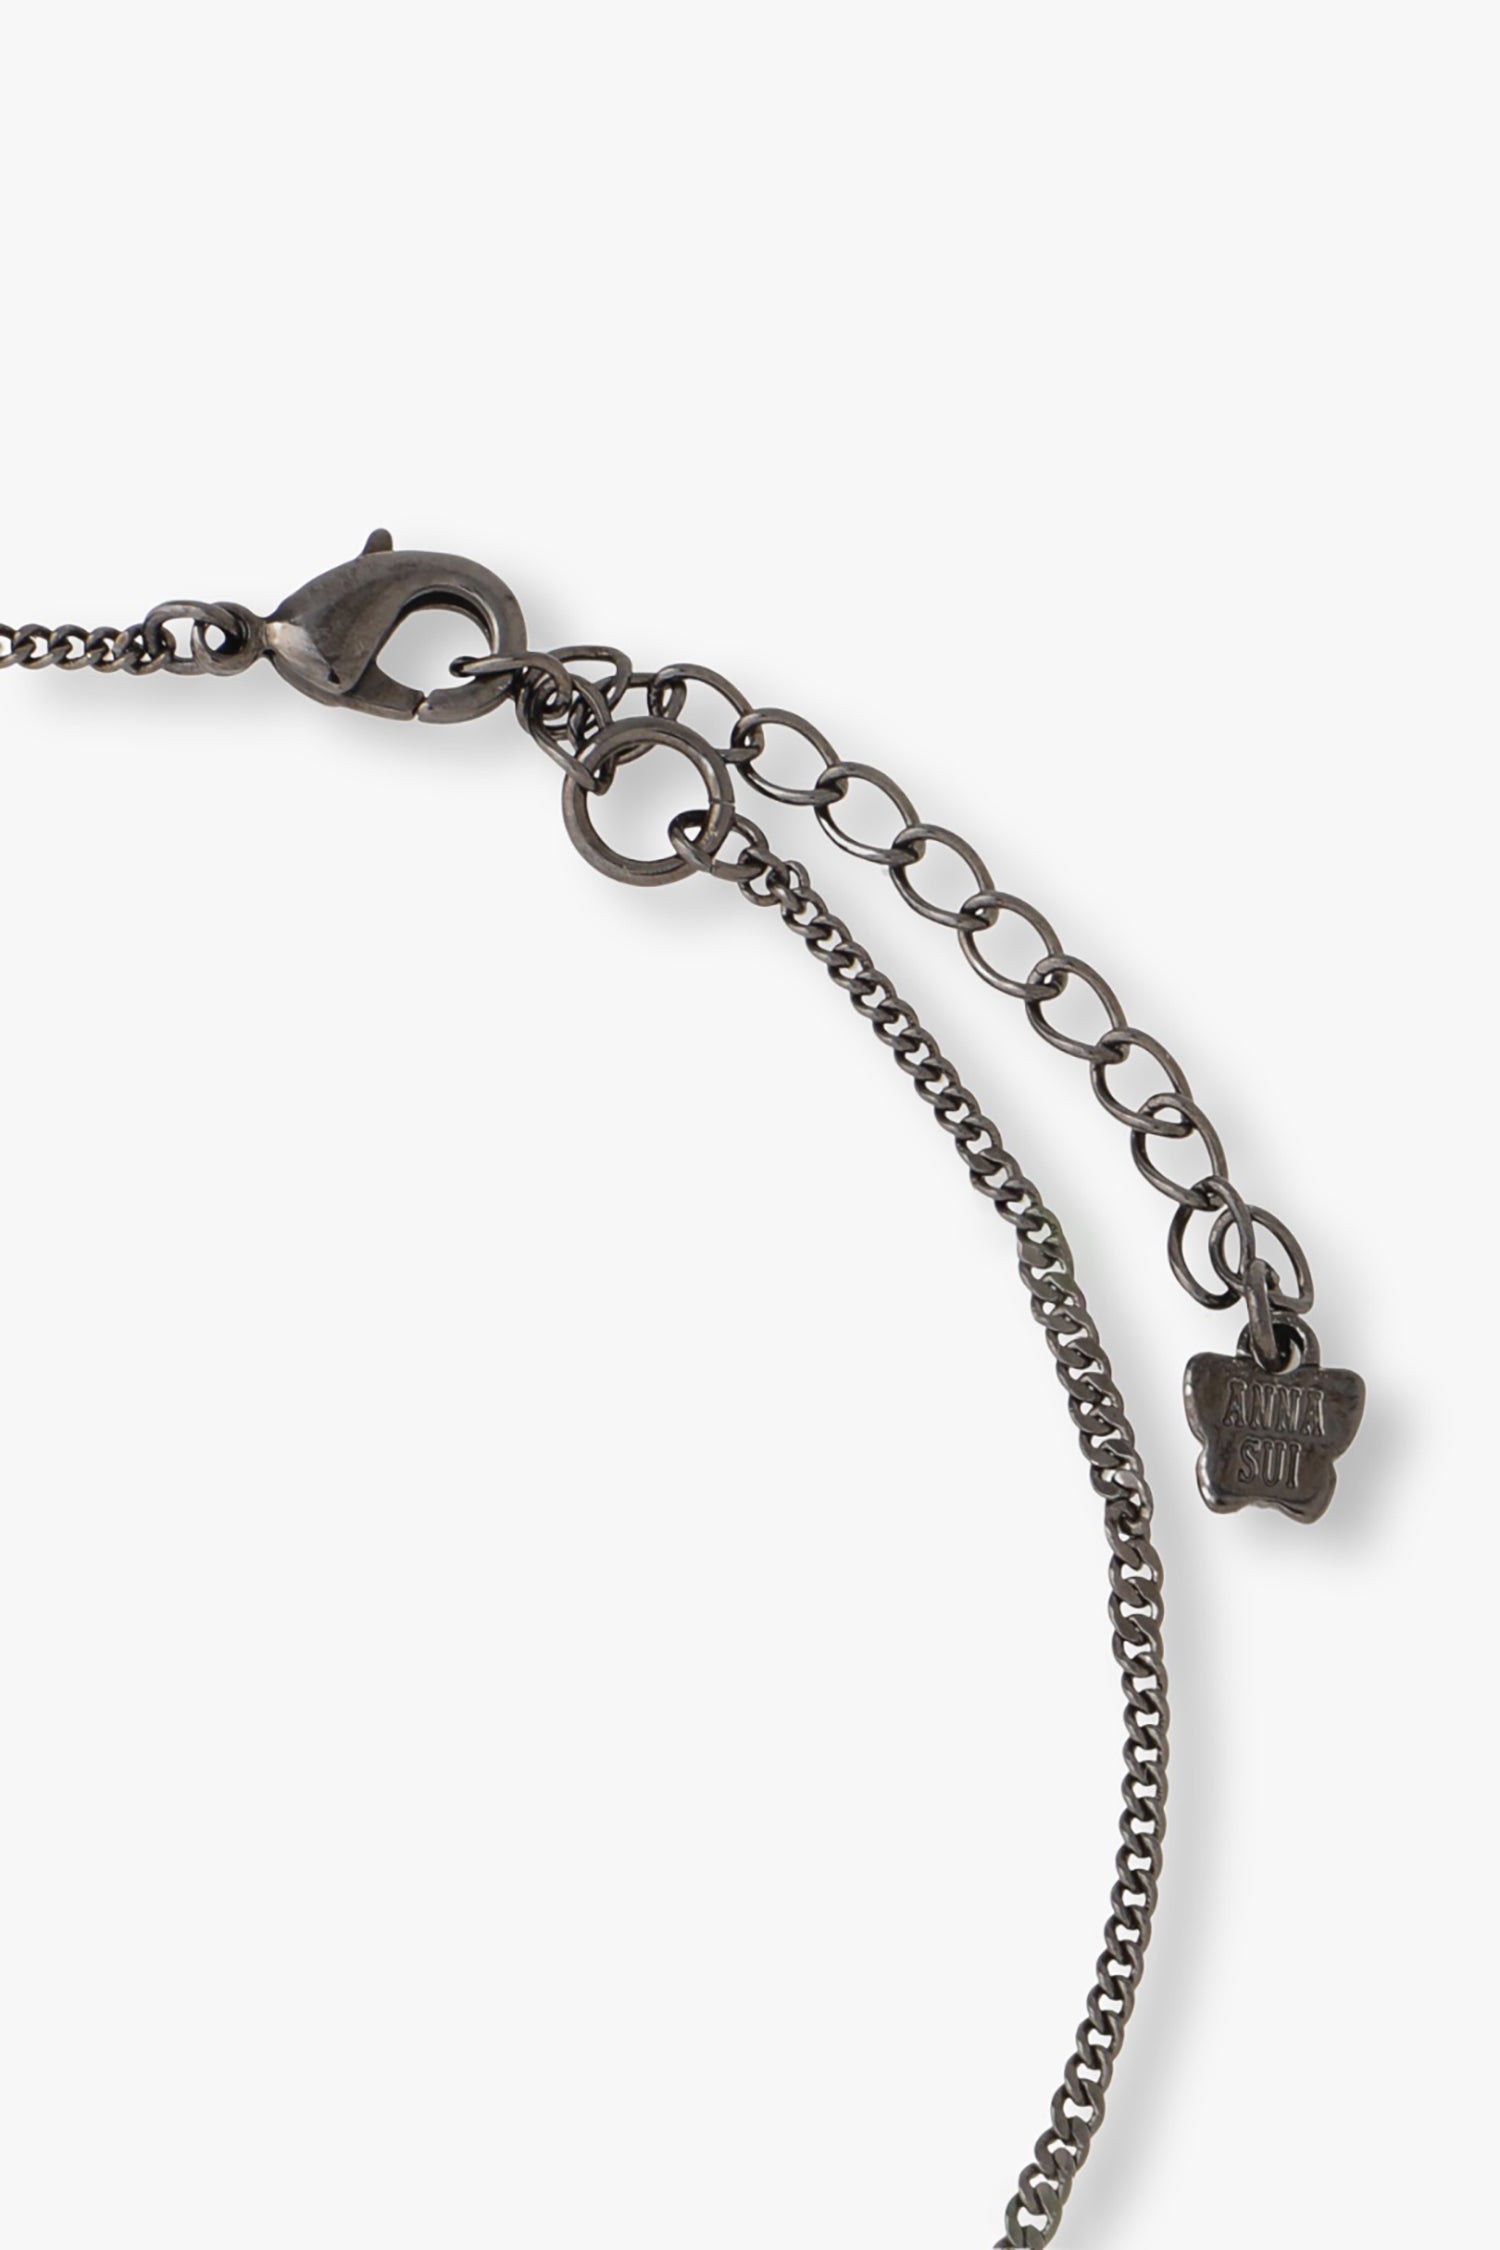 Gunmetal chain is with a lobster claw clasp lock, butterfly with Anna Sui imprint logo at the end